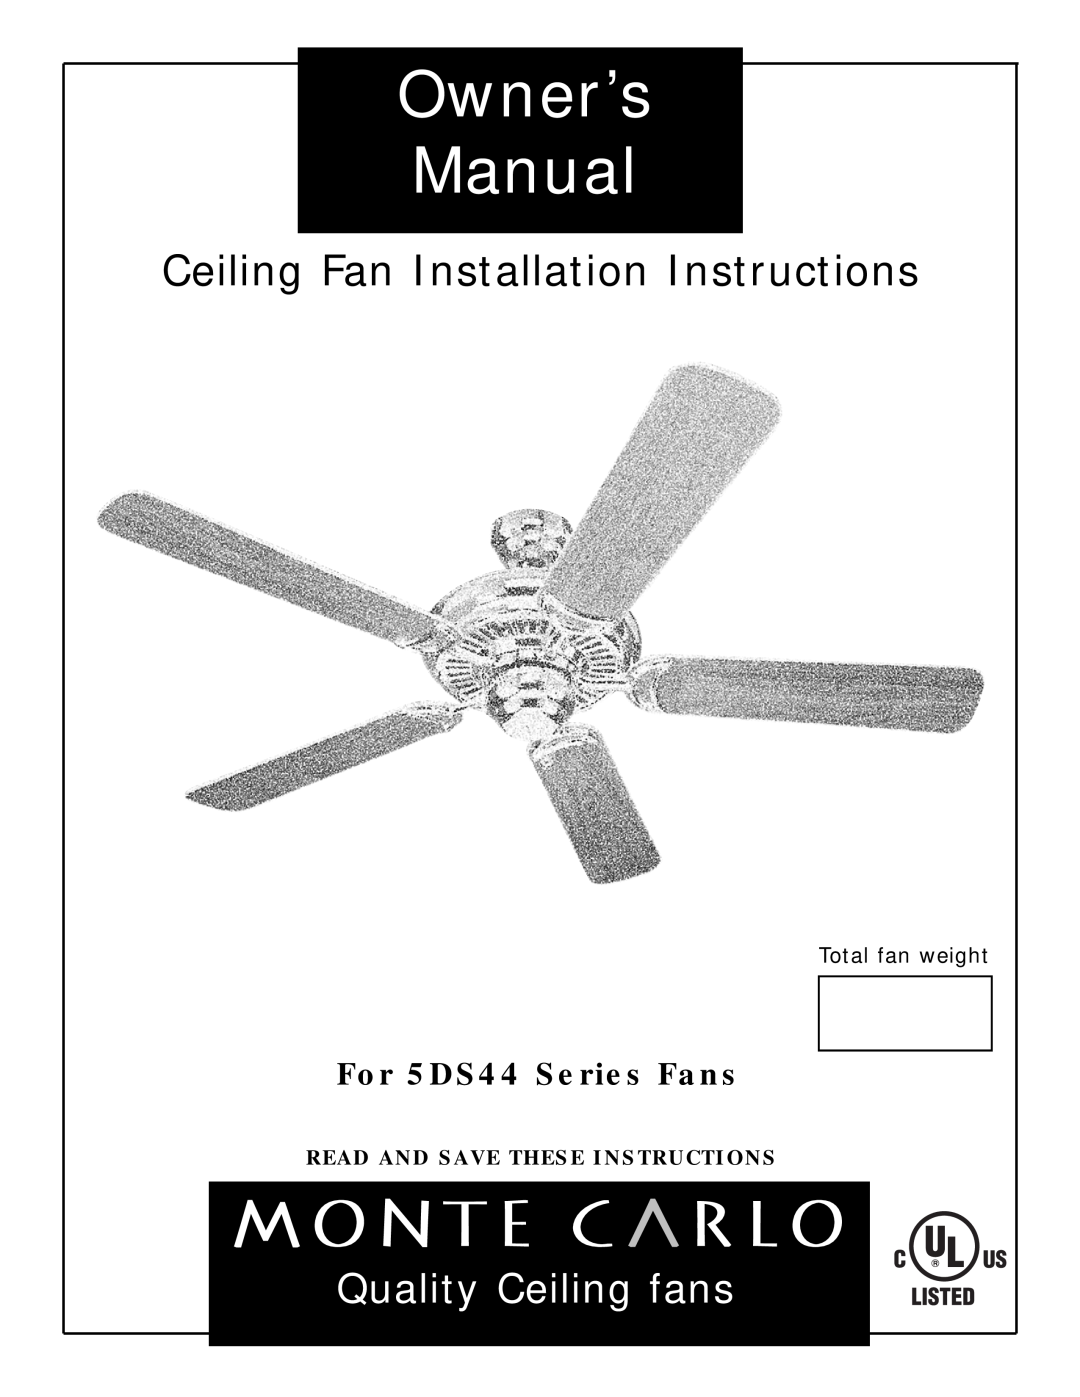 Monte Carlo Fan Company owner manual For 5DS44 Series Fans, Total fan weight, Owner’s Manual, Quality Ceiling fans 